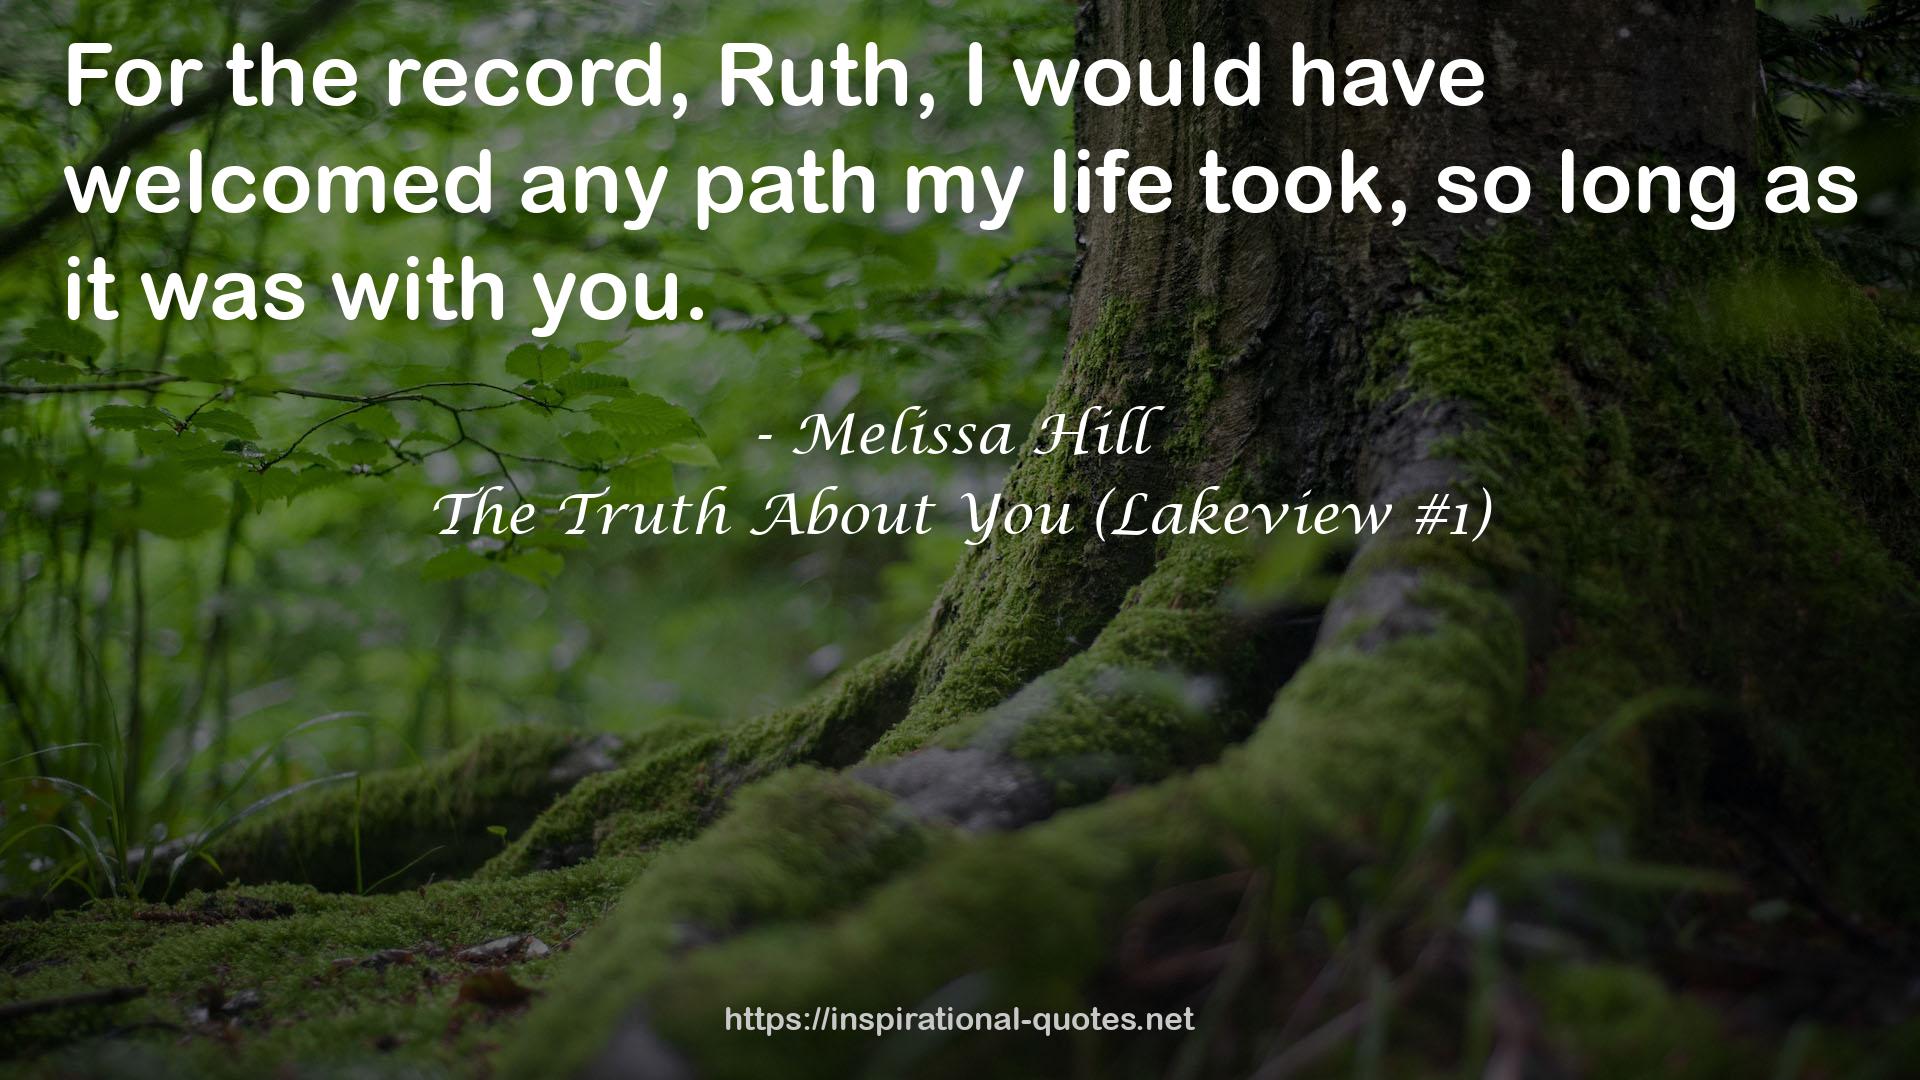 The Truth About You (Lakeview #1) QUOTES